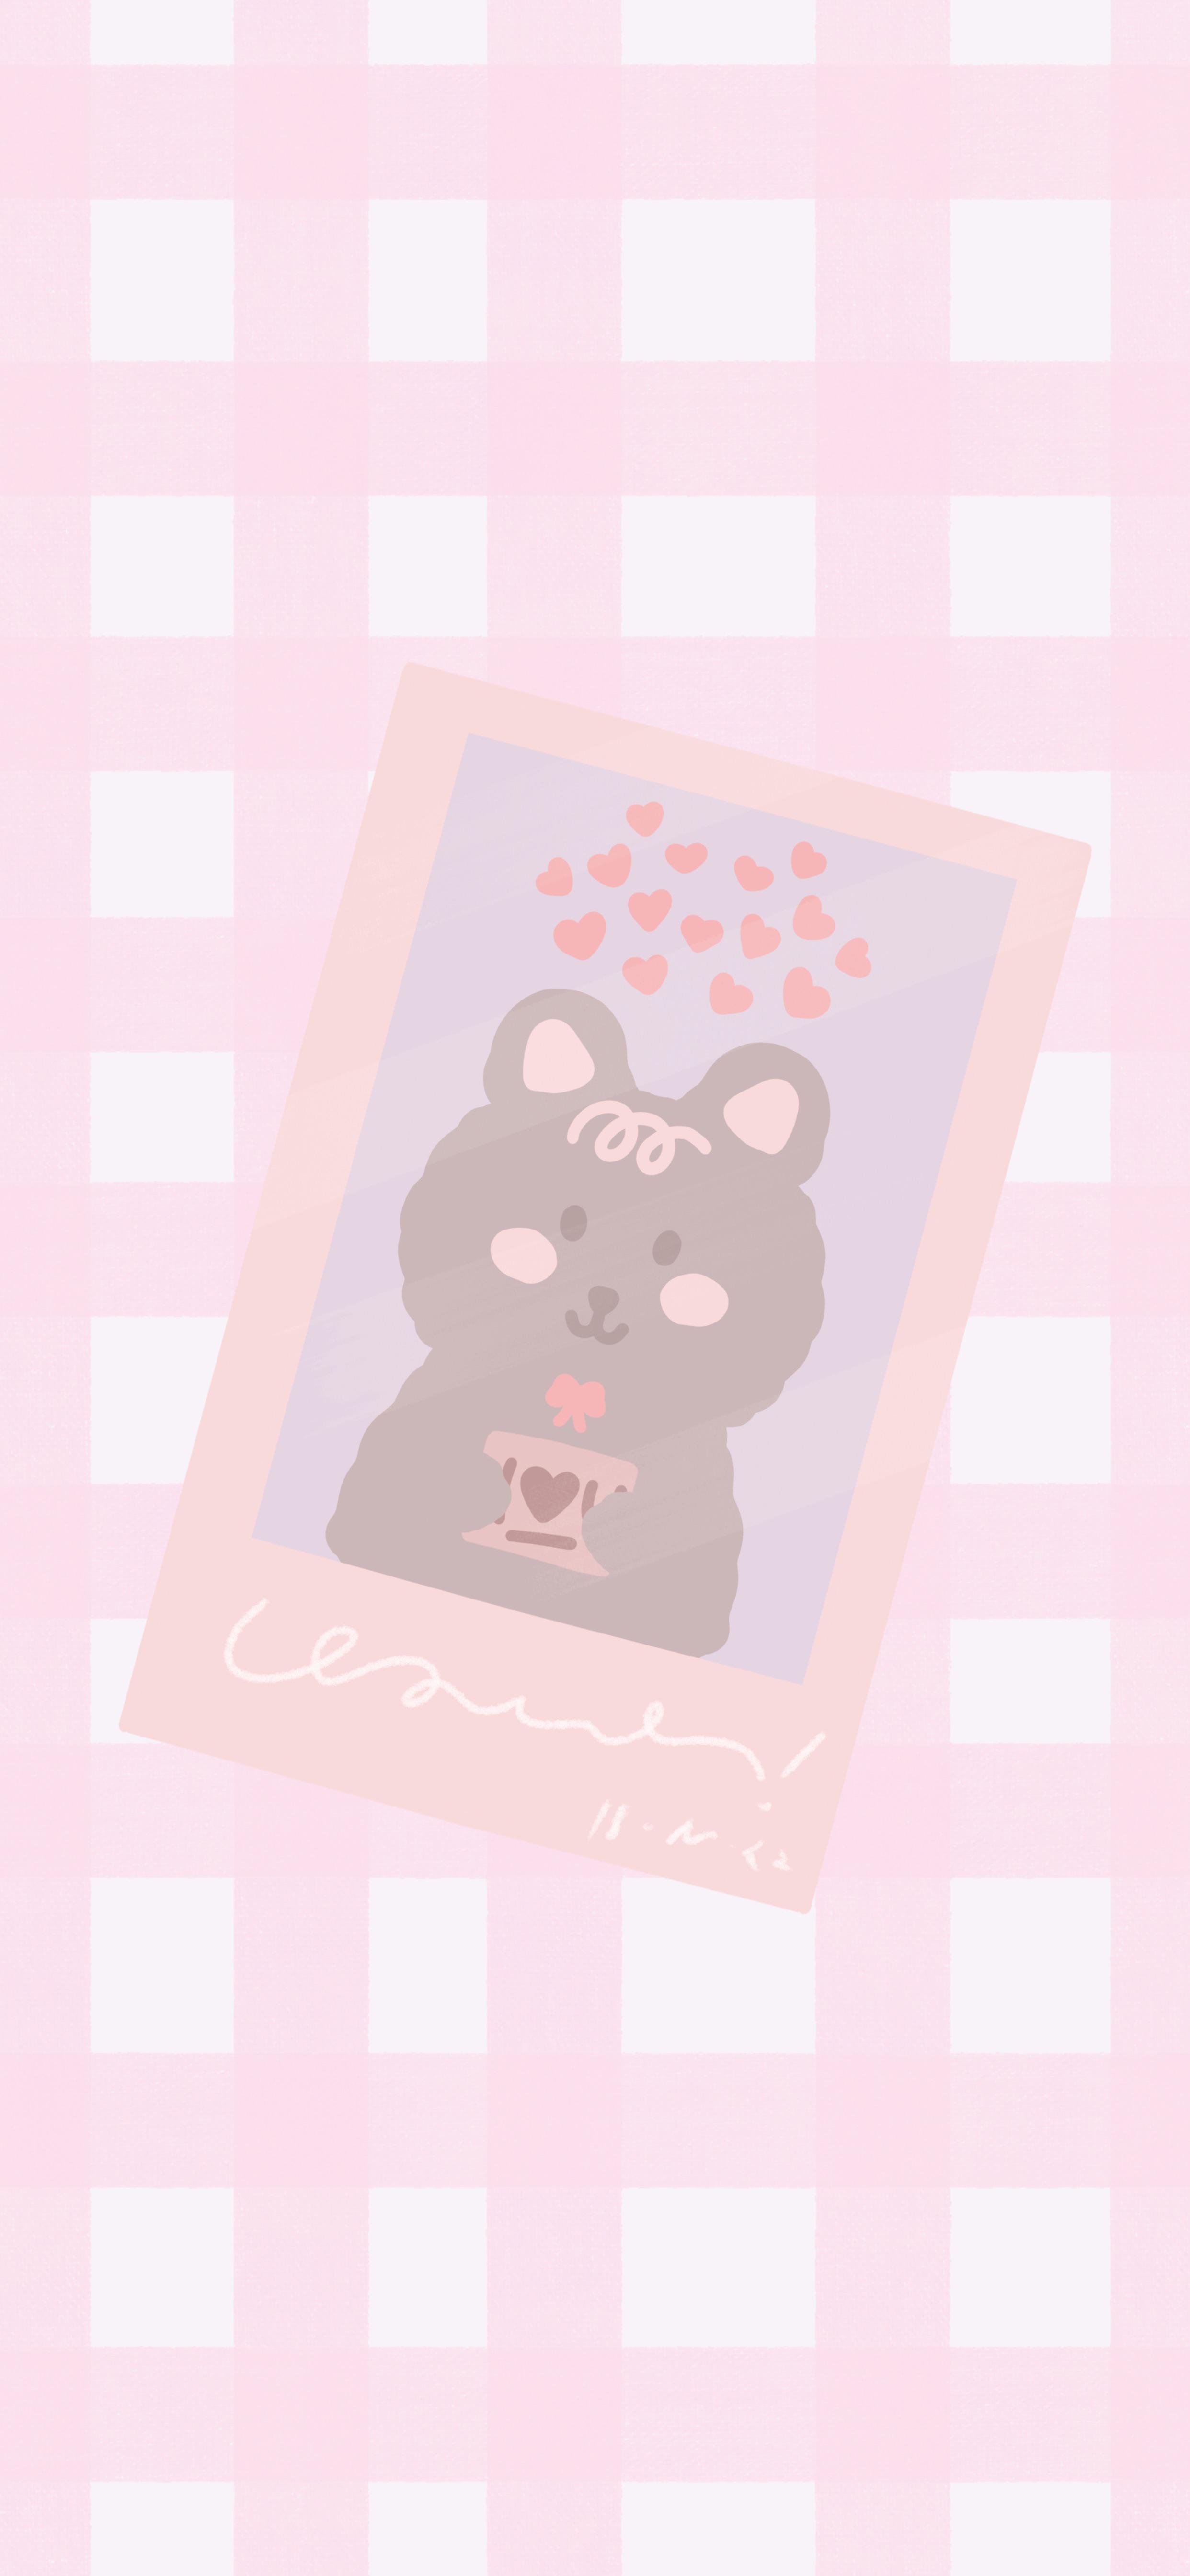 I made a cute bear! Instax inspired :) made it to a phone wallpaper